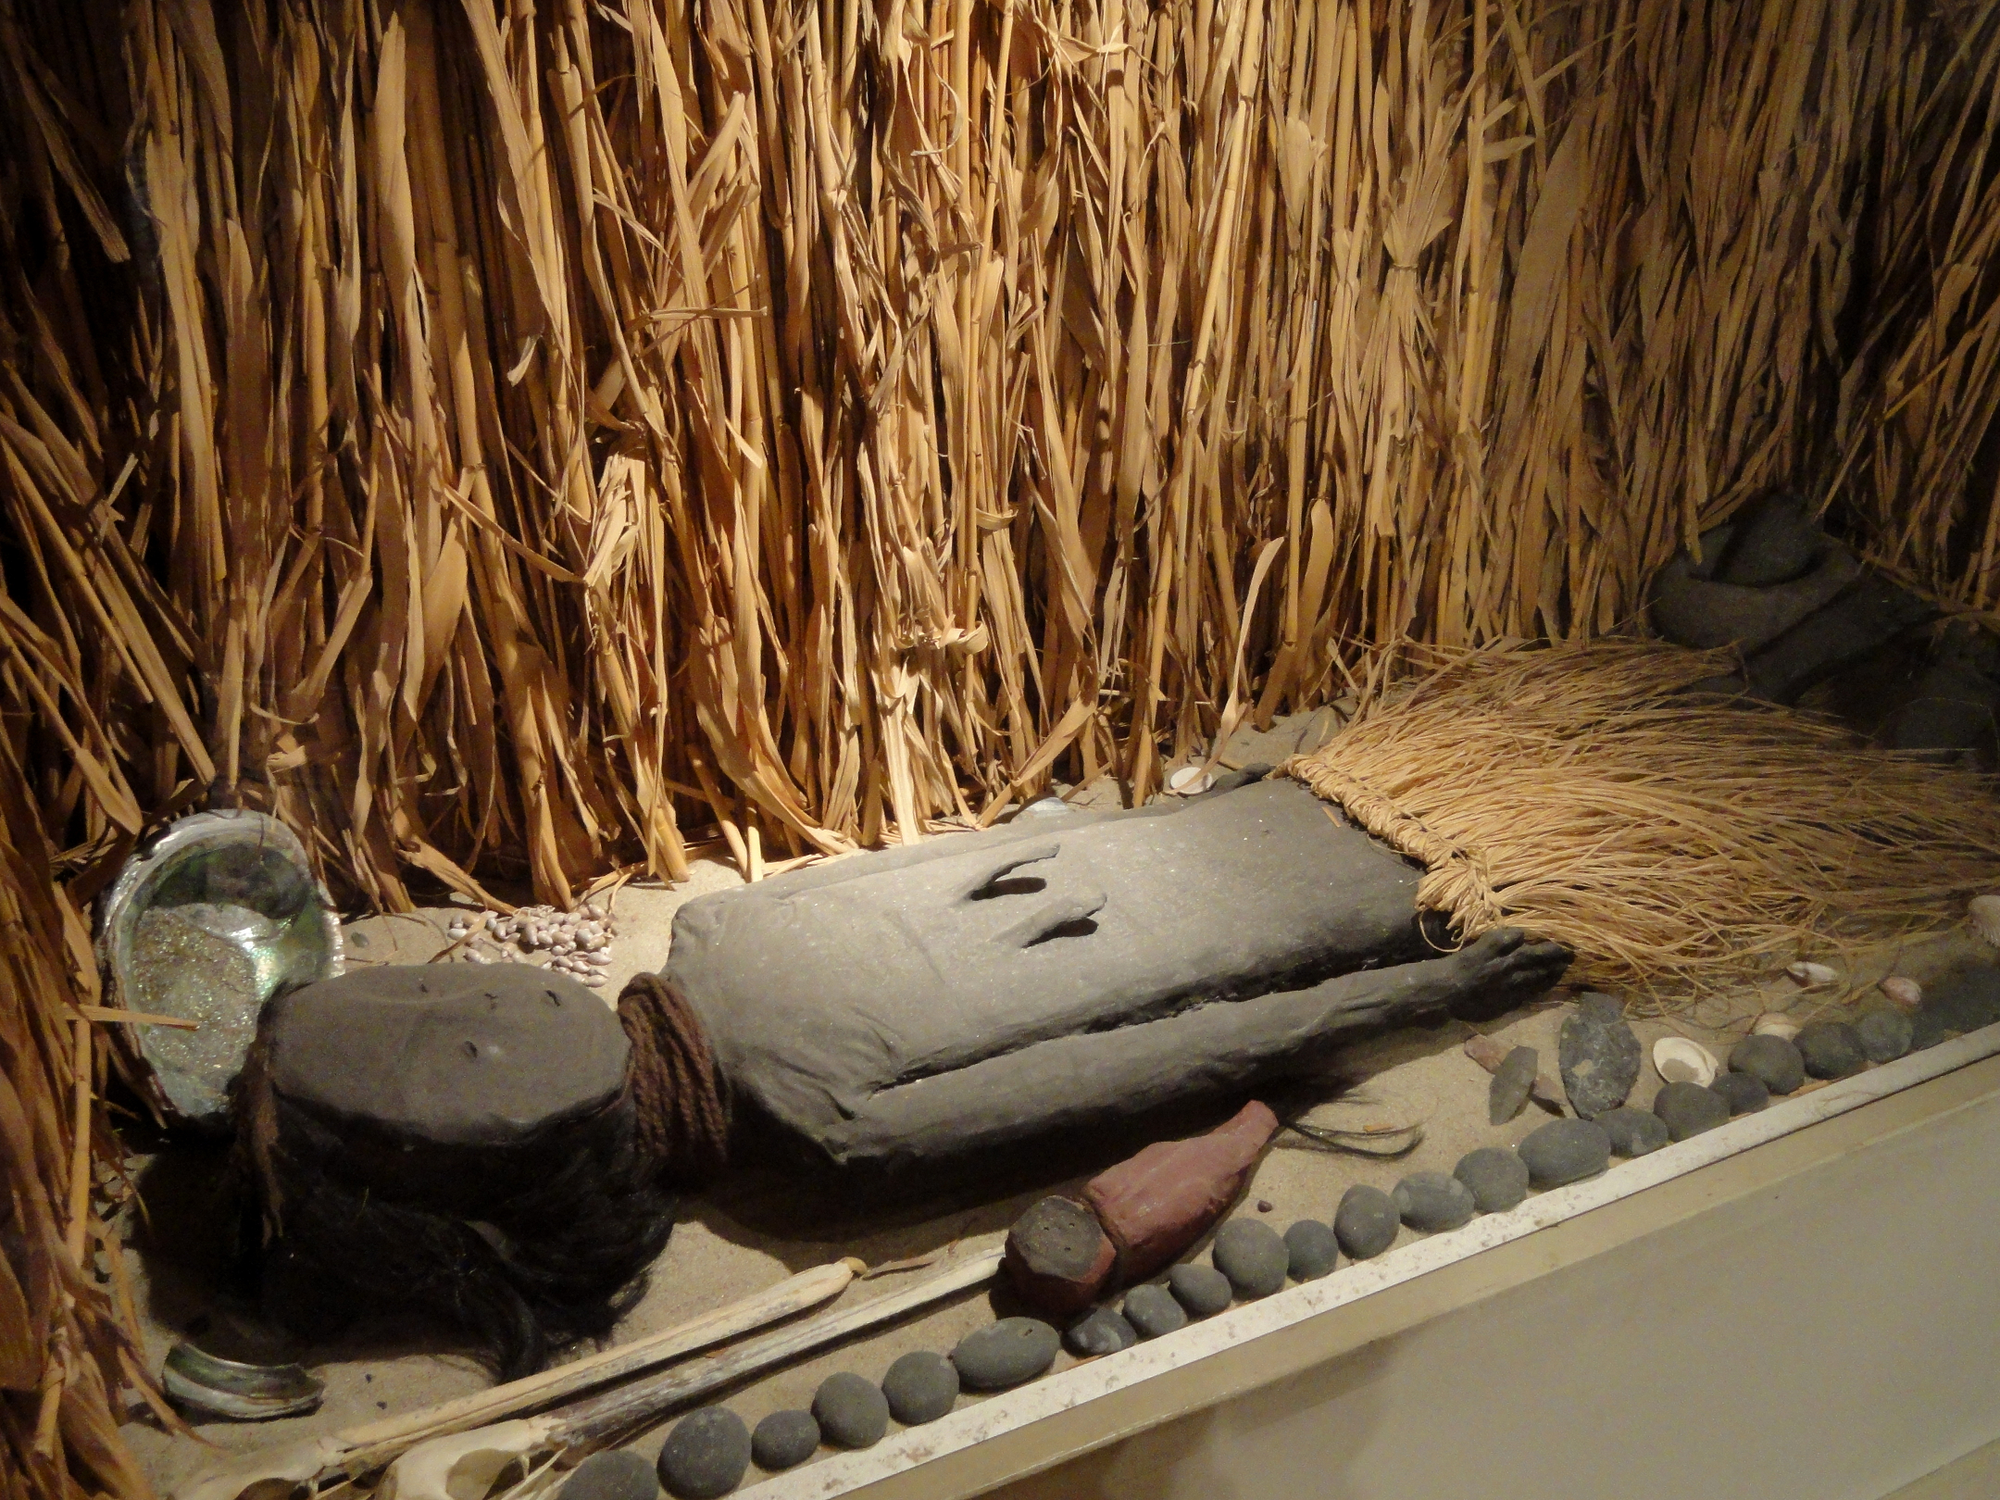 Not Egypt, which civilization adopted the practice of mummification first?  - Photo 3.